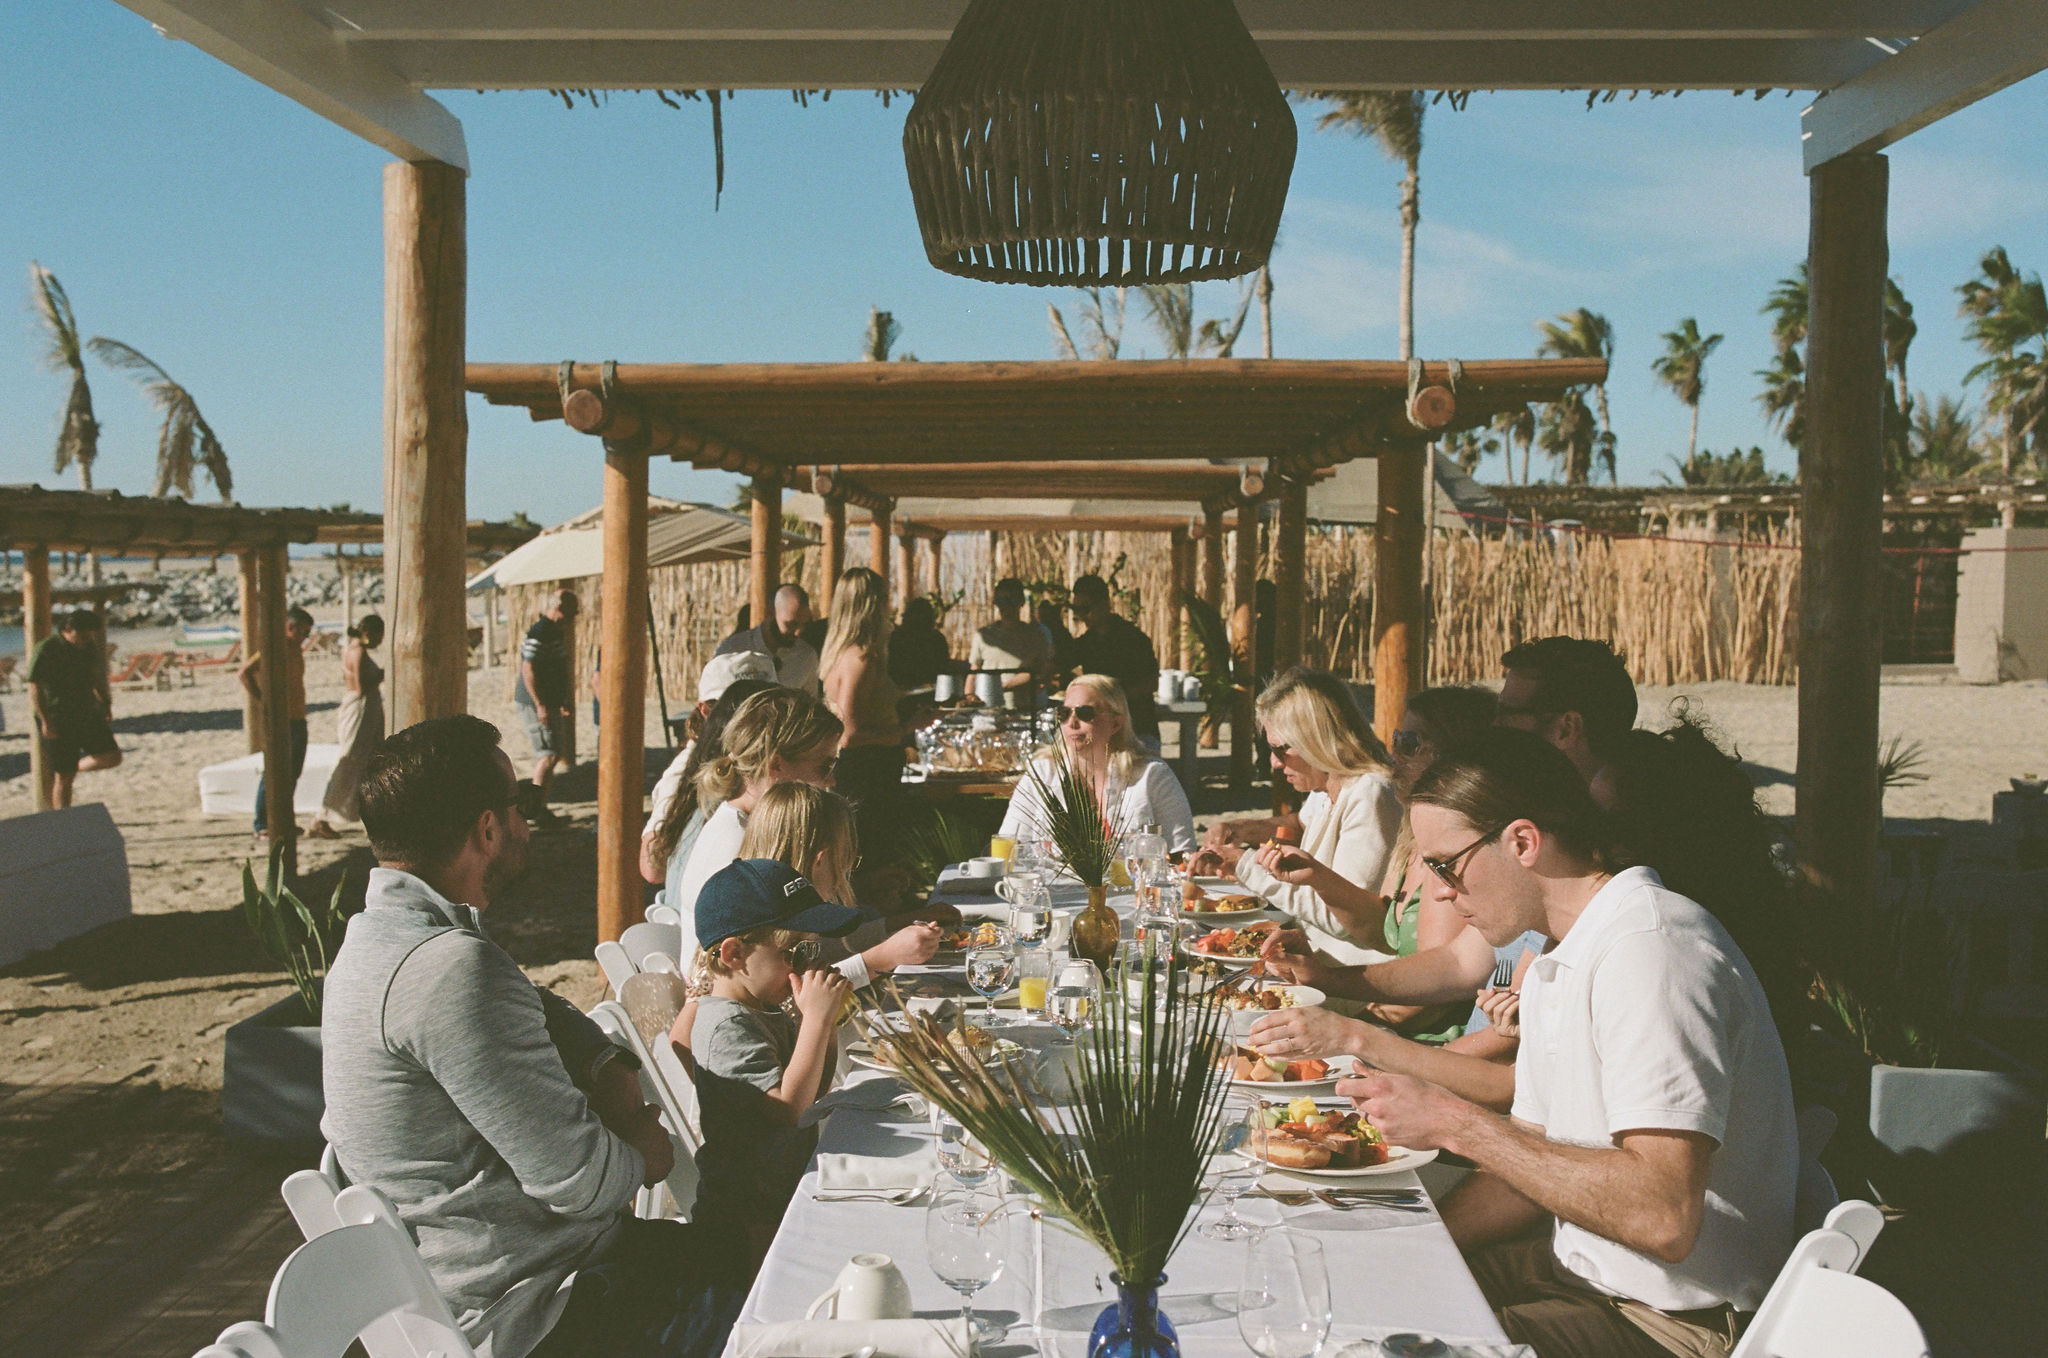 film style photo with grainy filter. 
al fresco style breakfast on the beach. Long tables with basket chandeliers under wooden auning. palm leaf decor on tables. family eating together. 